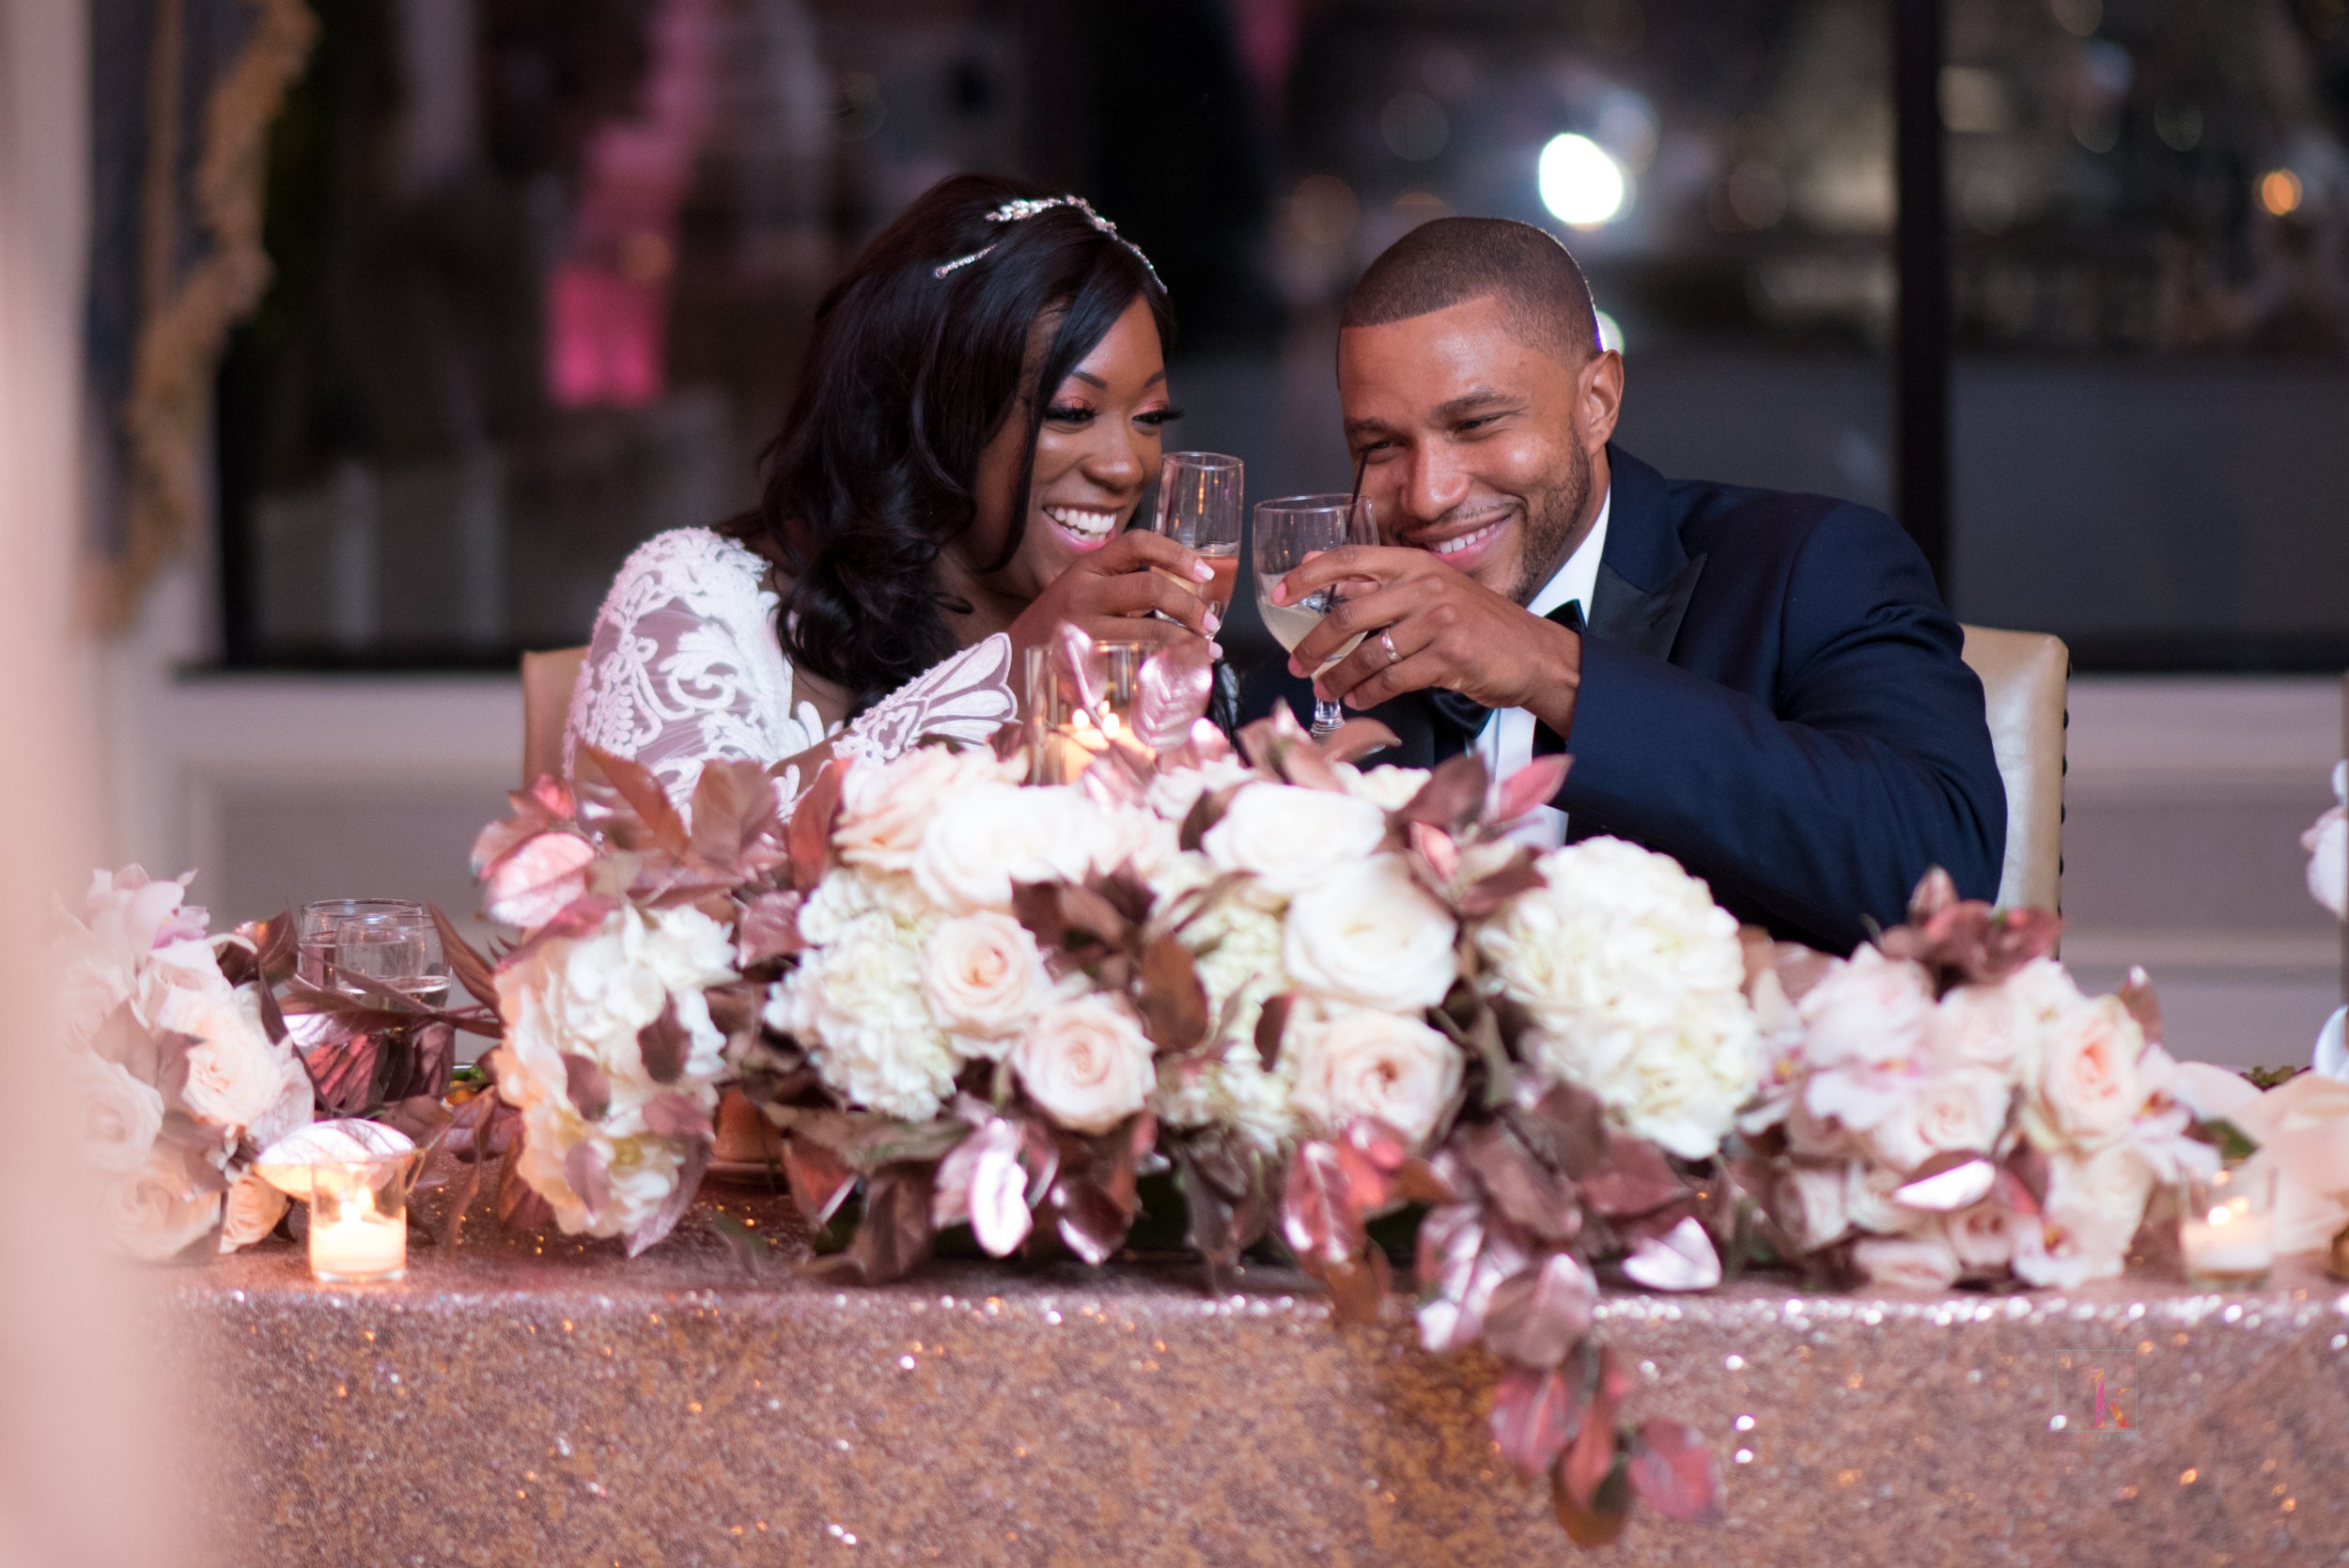 Al Sharpton's Daughter Married The Man Of Her Dreams In A Public And Love-Filled Ceremony
